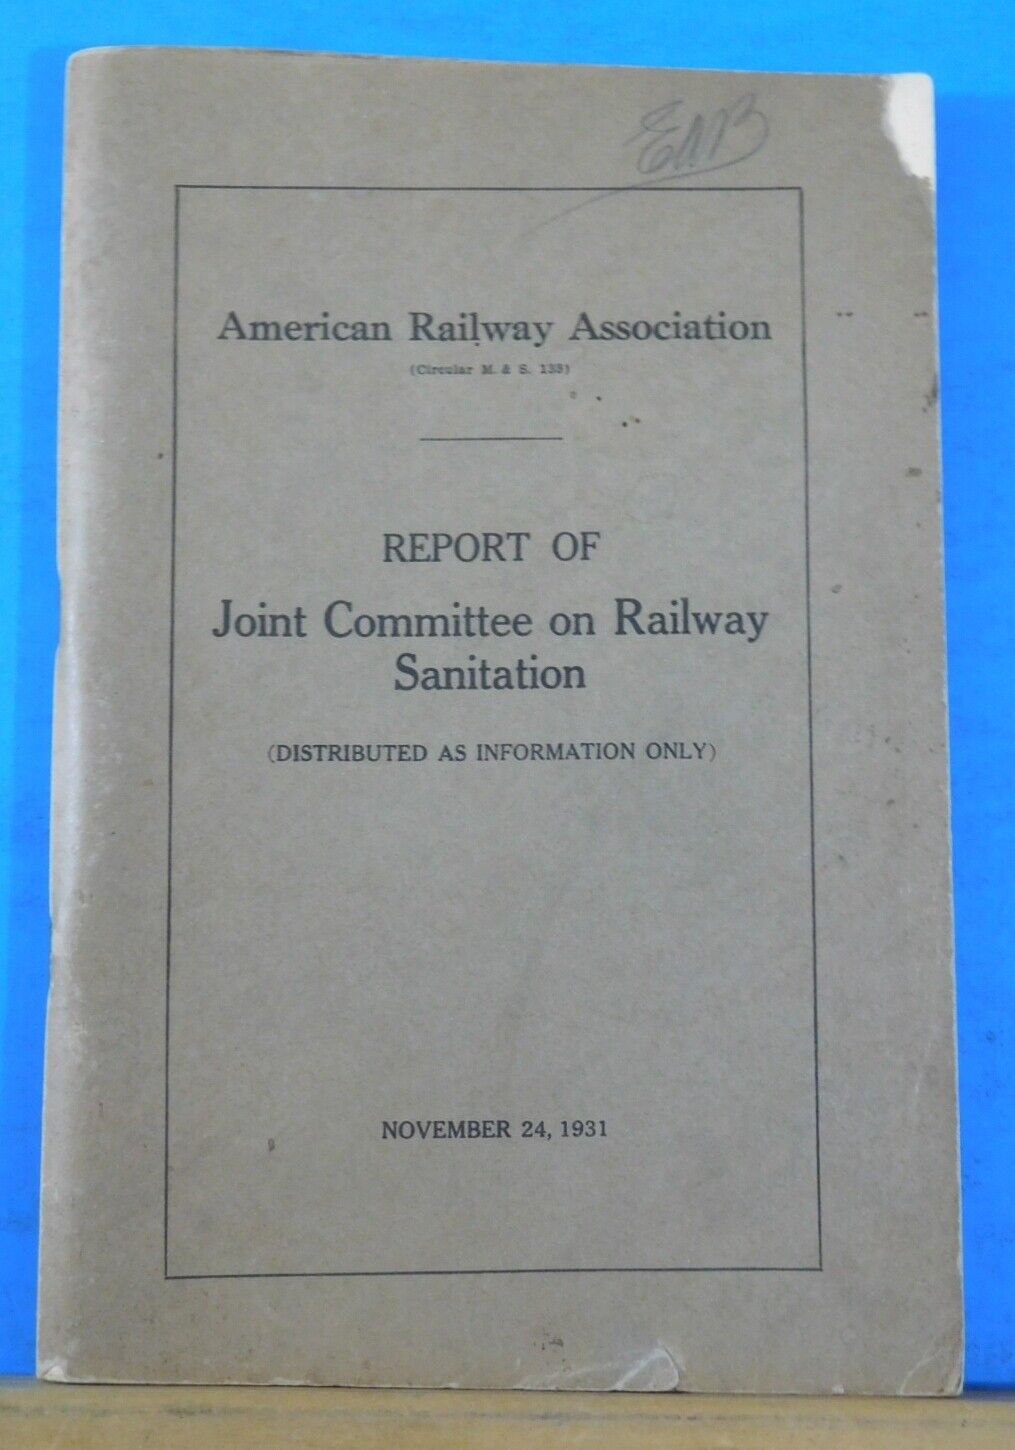 Report of Joint Committee on Railway Sanitation 1931 Nov 24 A.R.A.